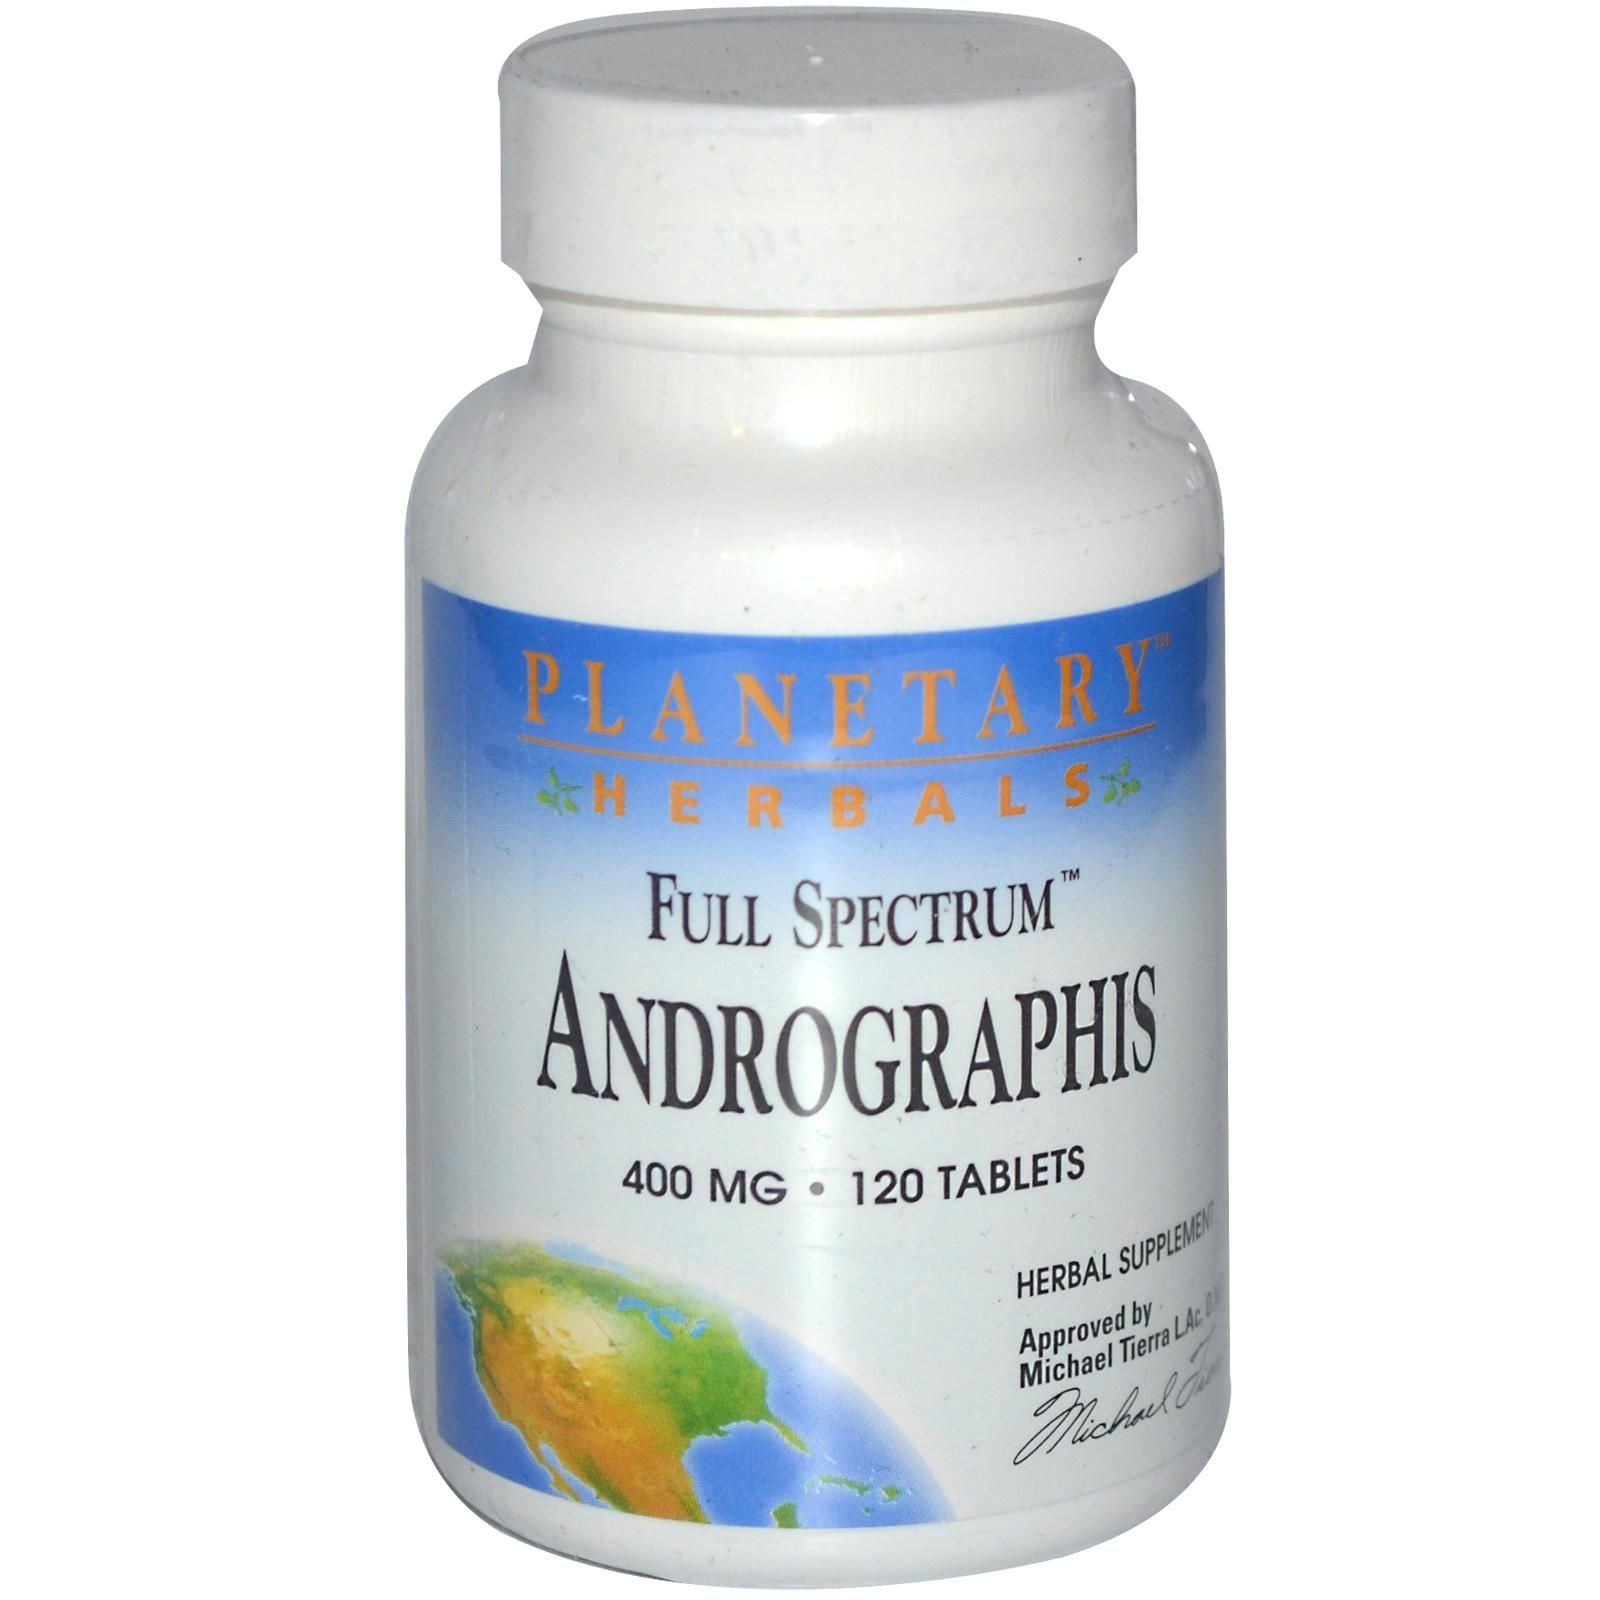 Planetary Herbals, Full Spectrum Andrographis, 400 mg, 120 Tablets ...